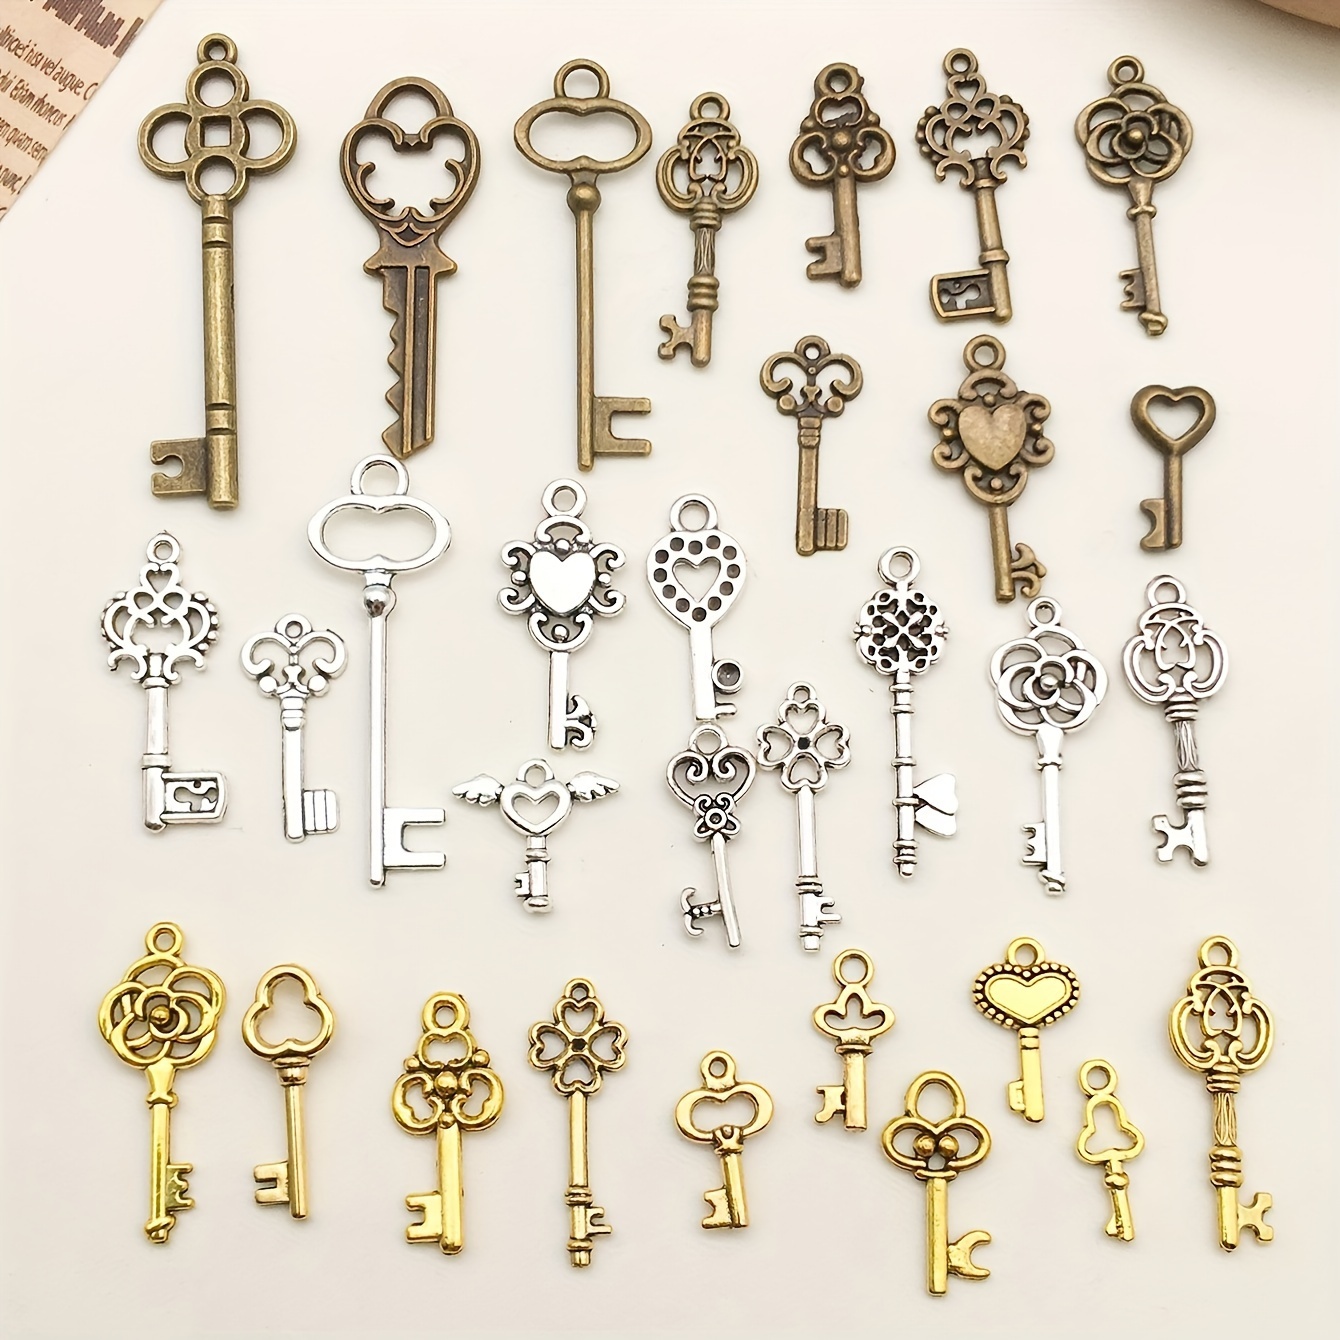 

30 Pcs Vintage Key Charms: A Mix Of Antique Bronze, Silver, And Pendants For Diy Jewelry Making